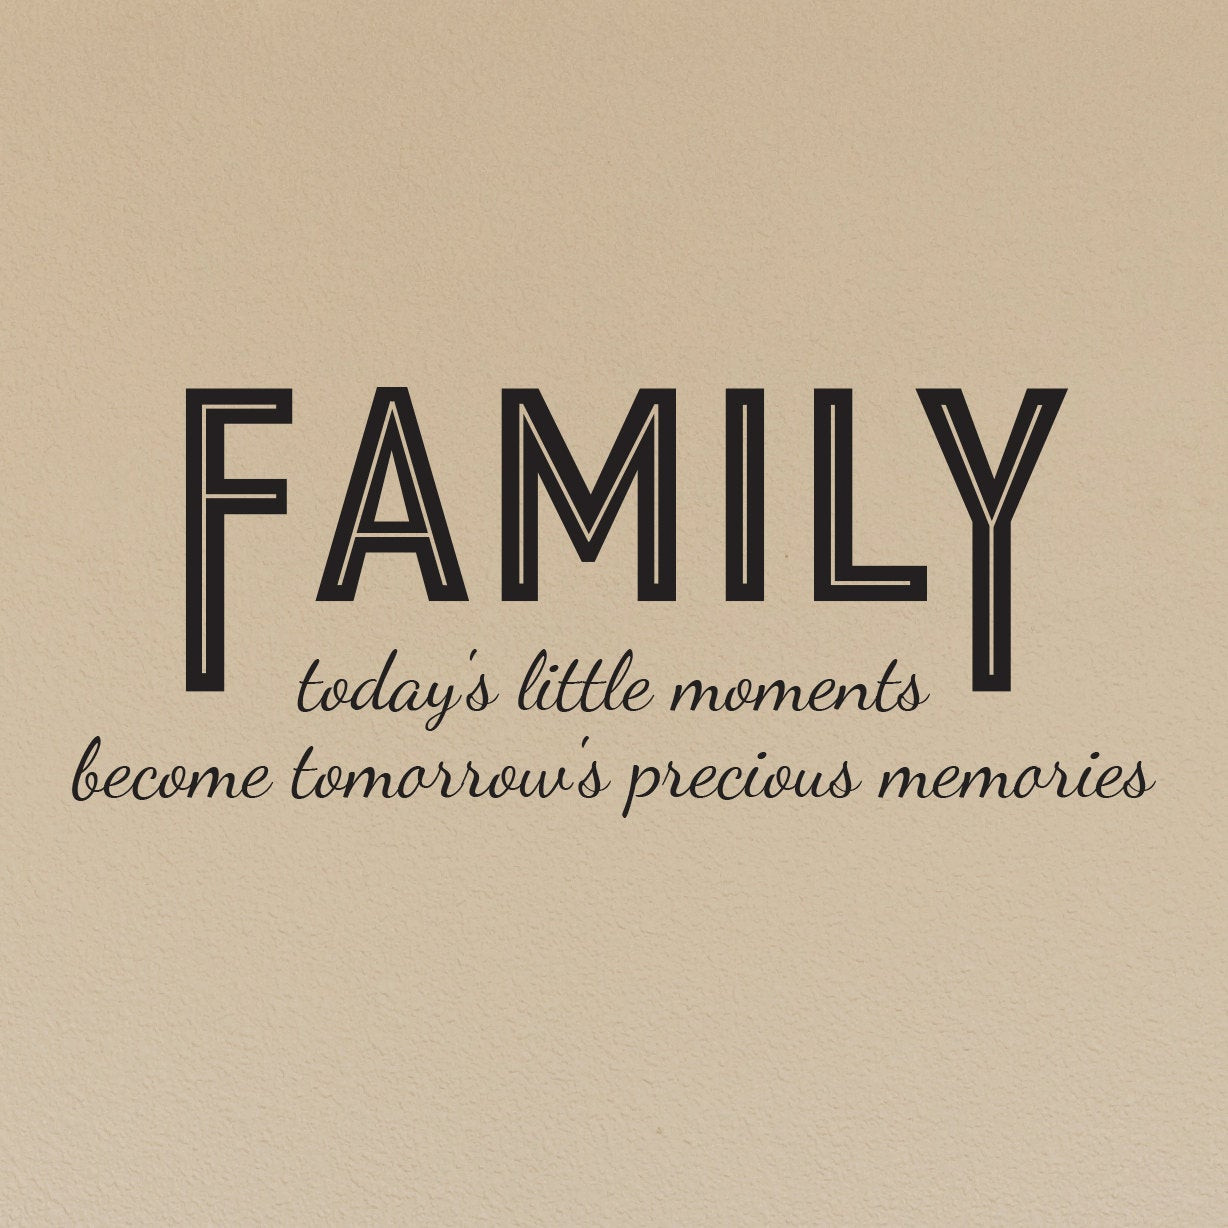 My Little Family Quotes
 Family today s little moments Quote Wall Decal by danadecals